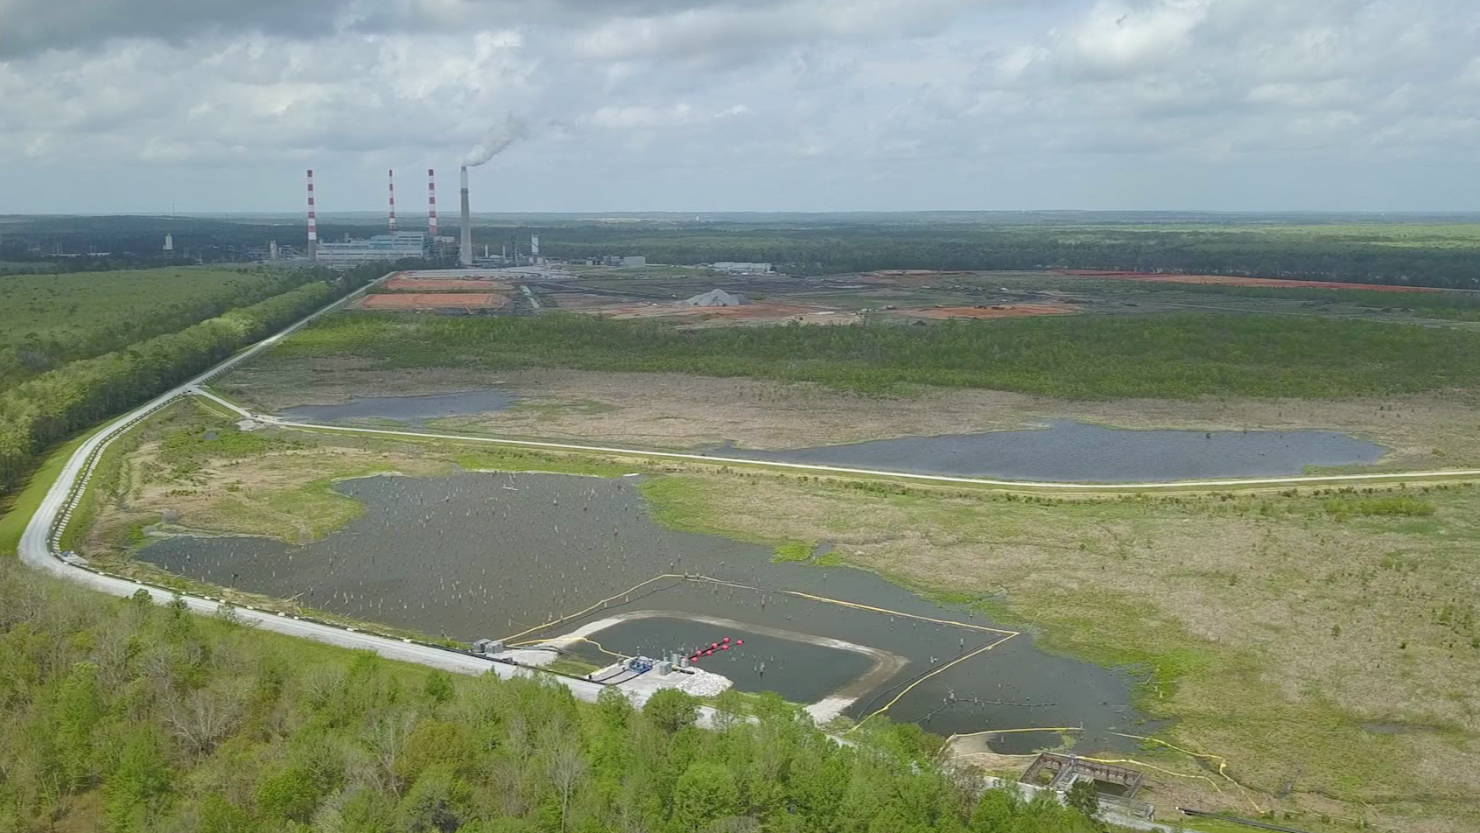 A coal ash pond is shown next to Alabama Power's James M. Barry Electric Generating Plant in Bucks, Alabama.